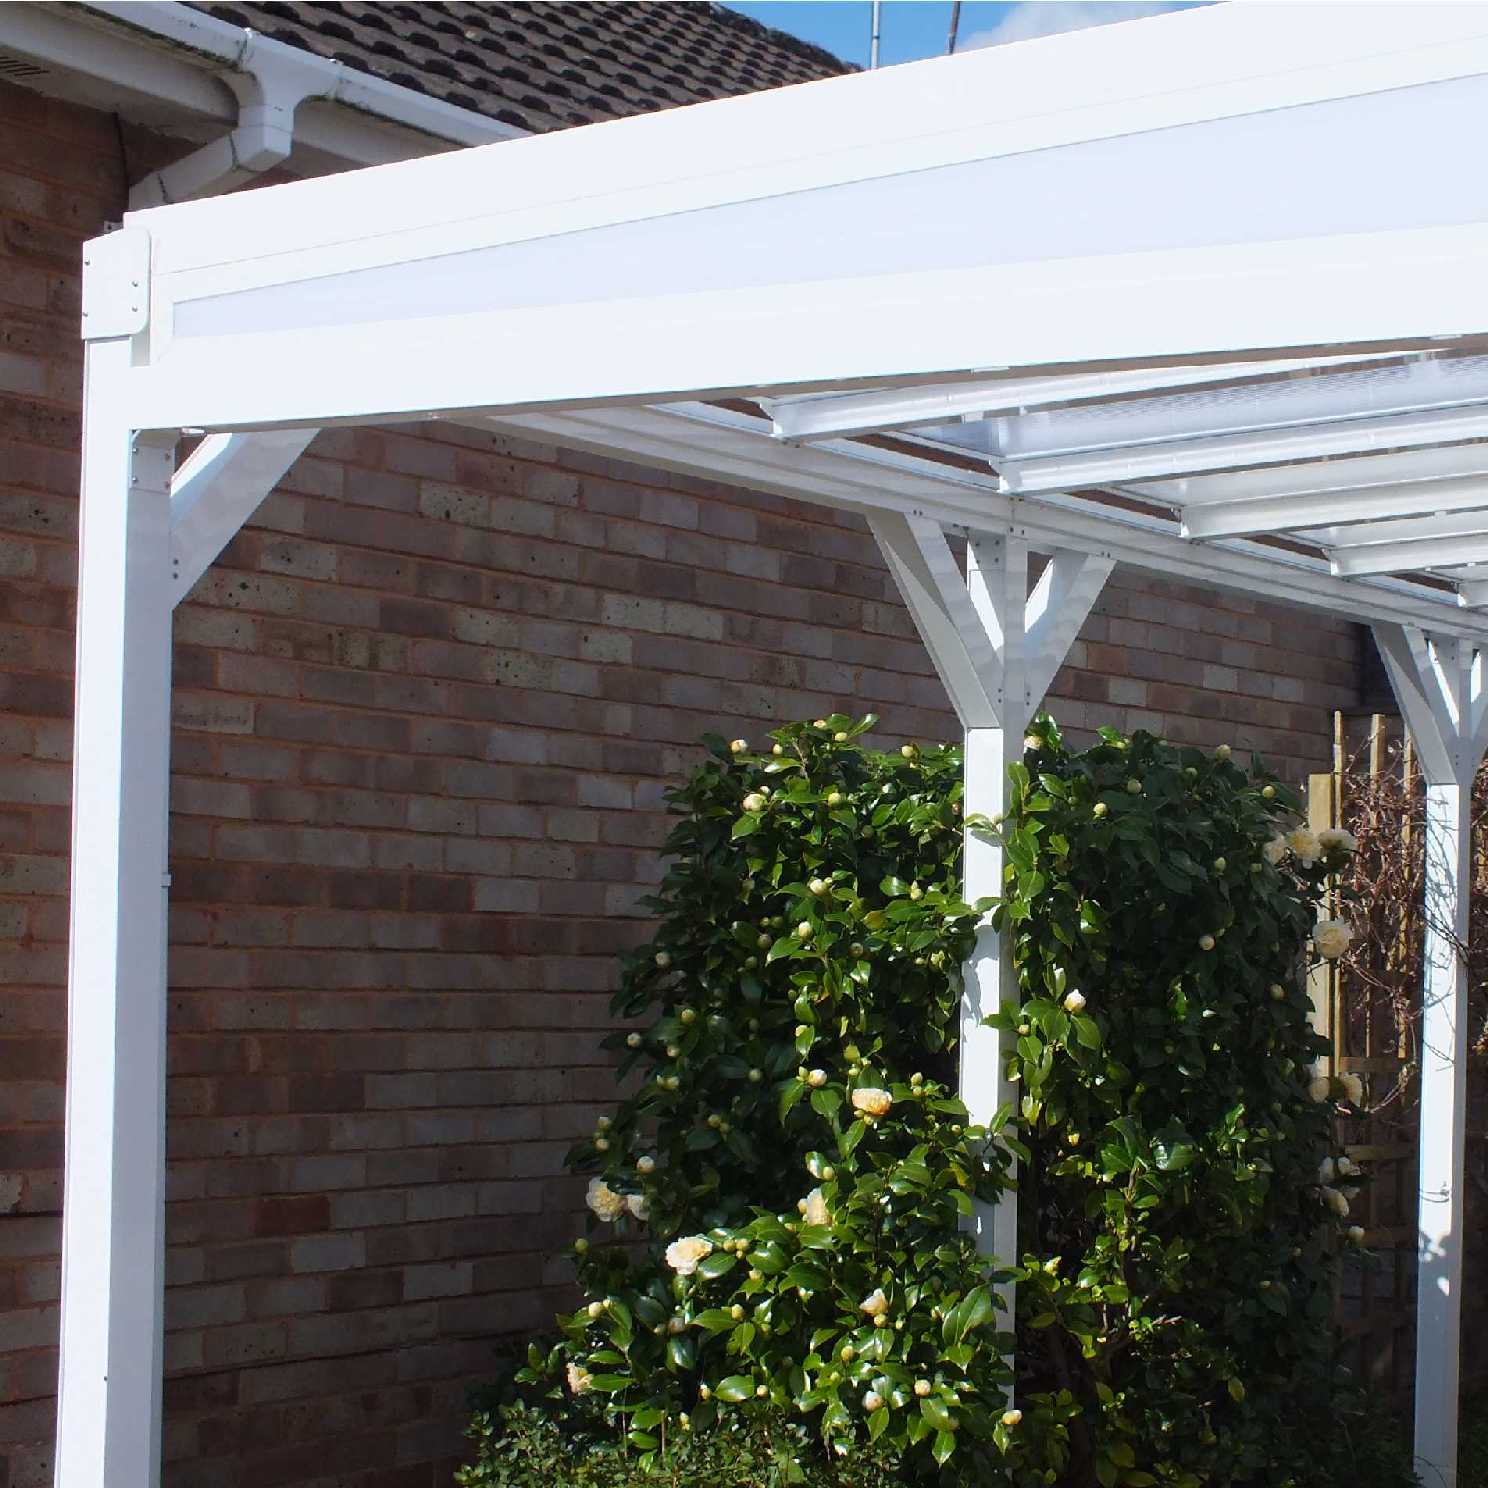 Omega Smart Lean-To Canopy, White with 16mm Polycarbonate Glazing - 7.0m (W) x 4.0m (P), (4) Supporting Posts from Omega Build